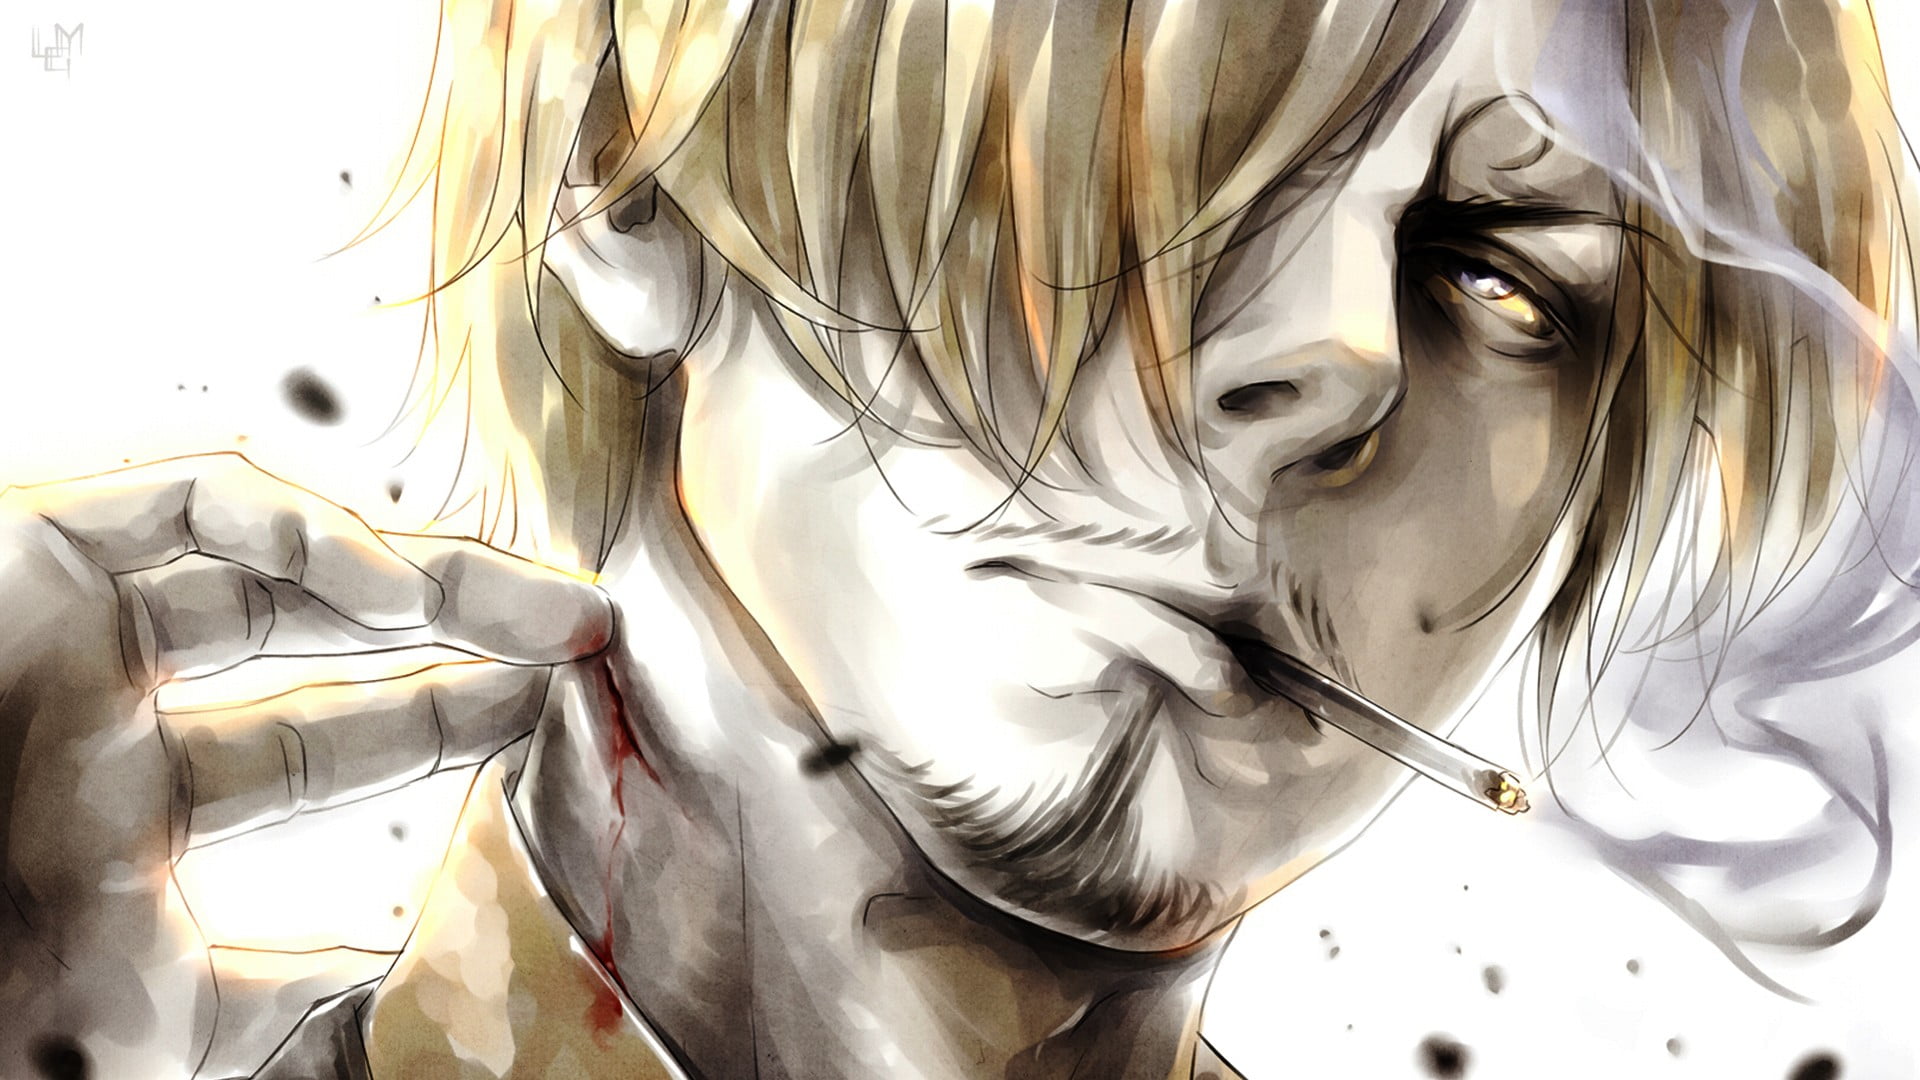 One Piece Sanji Blackleg, indoors, art and craft, close-up, one person